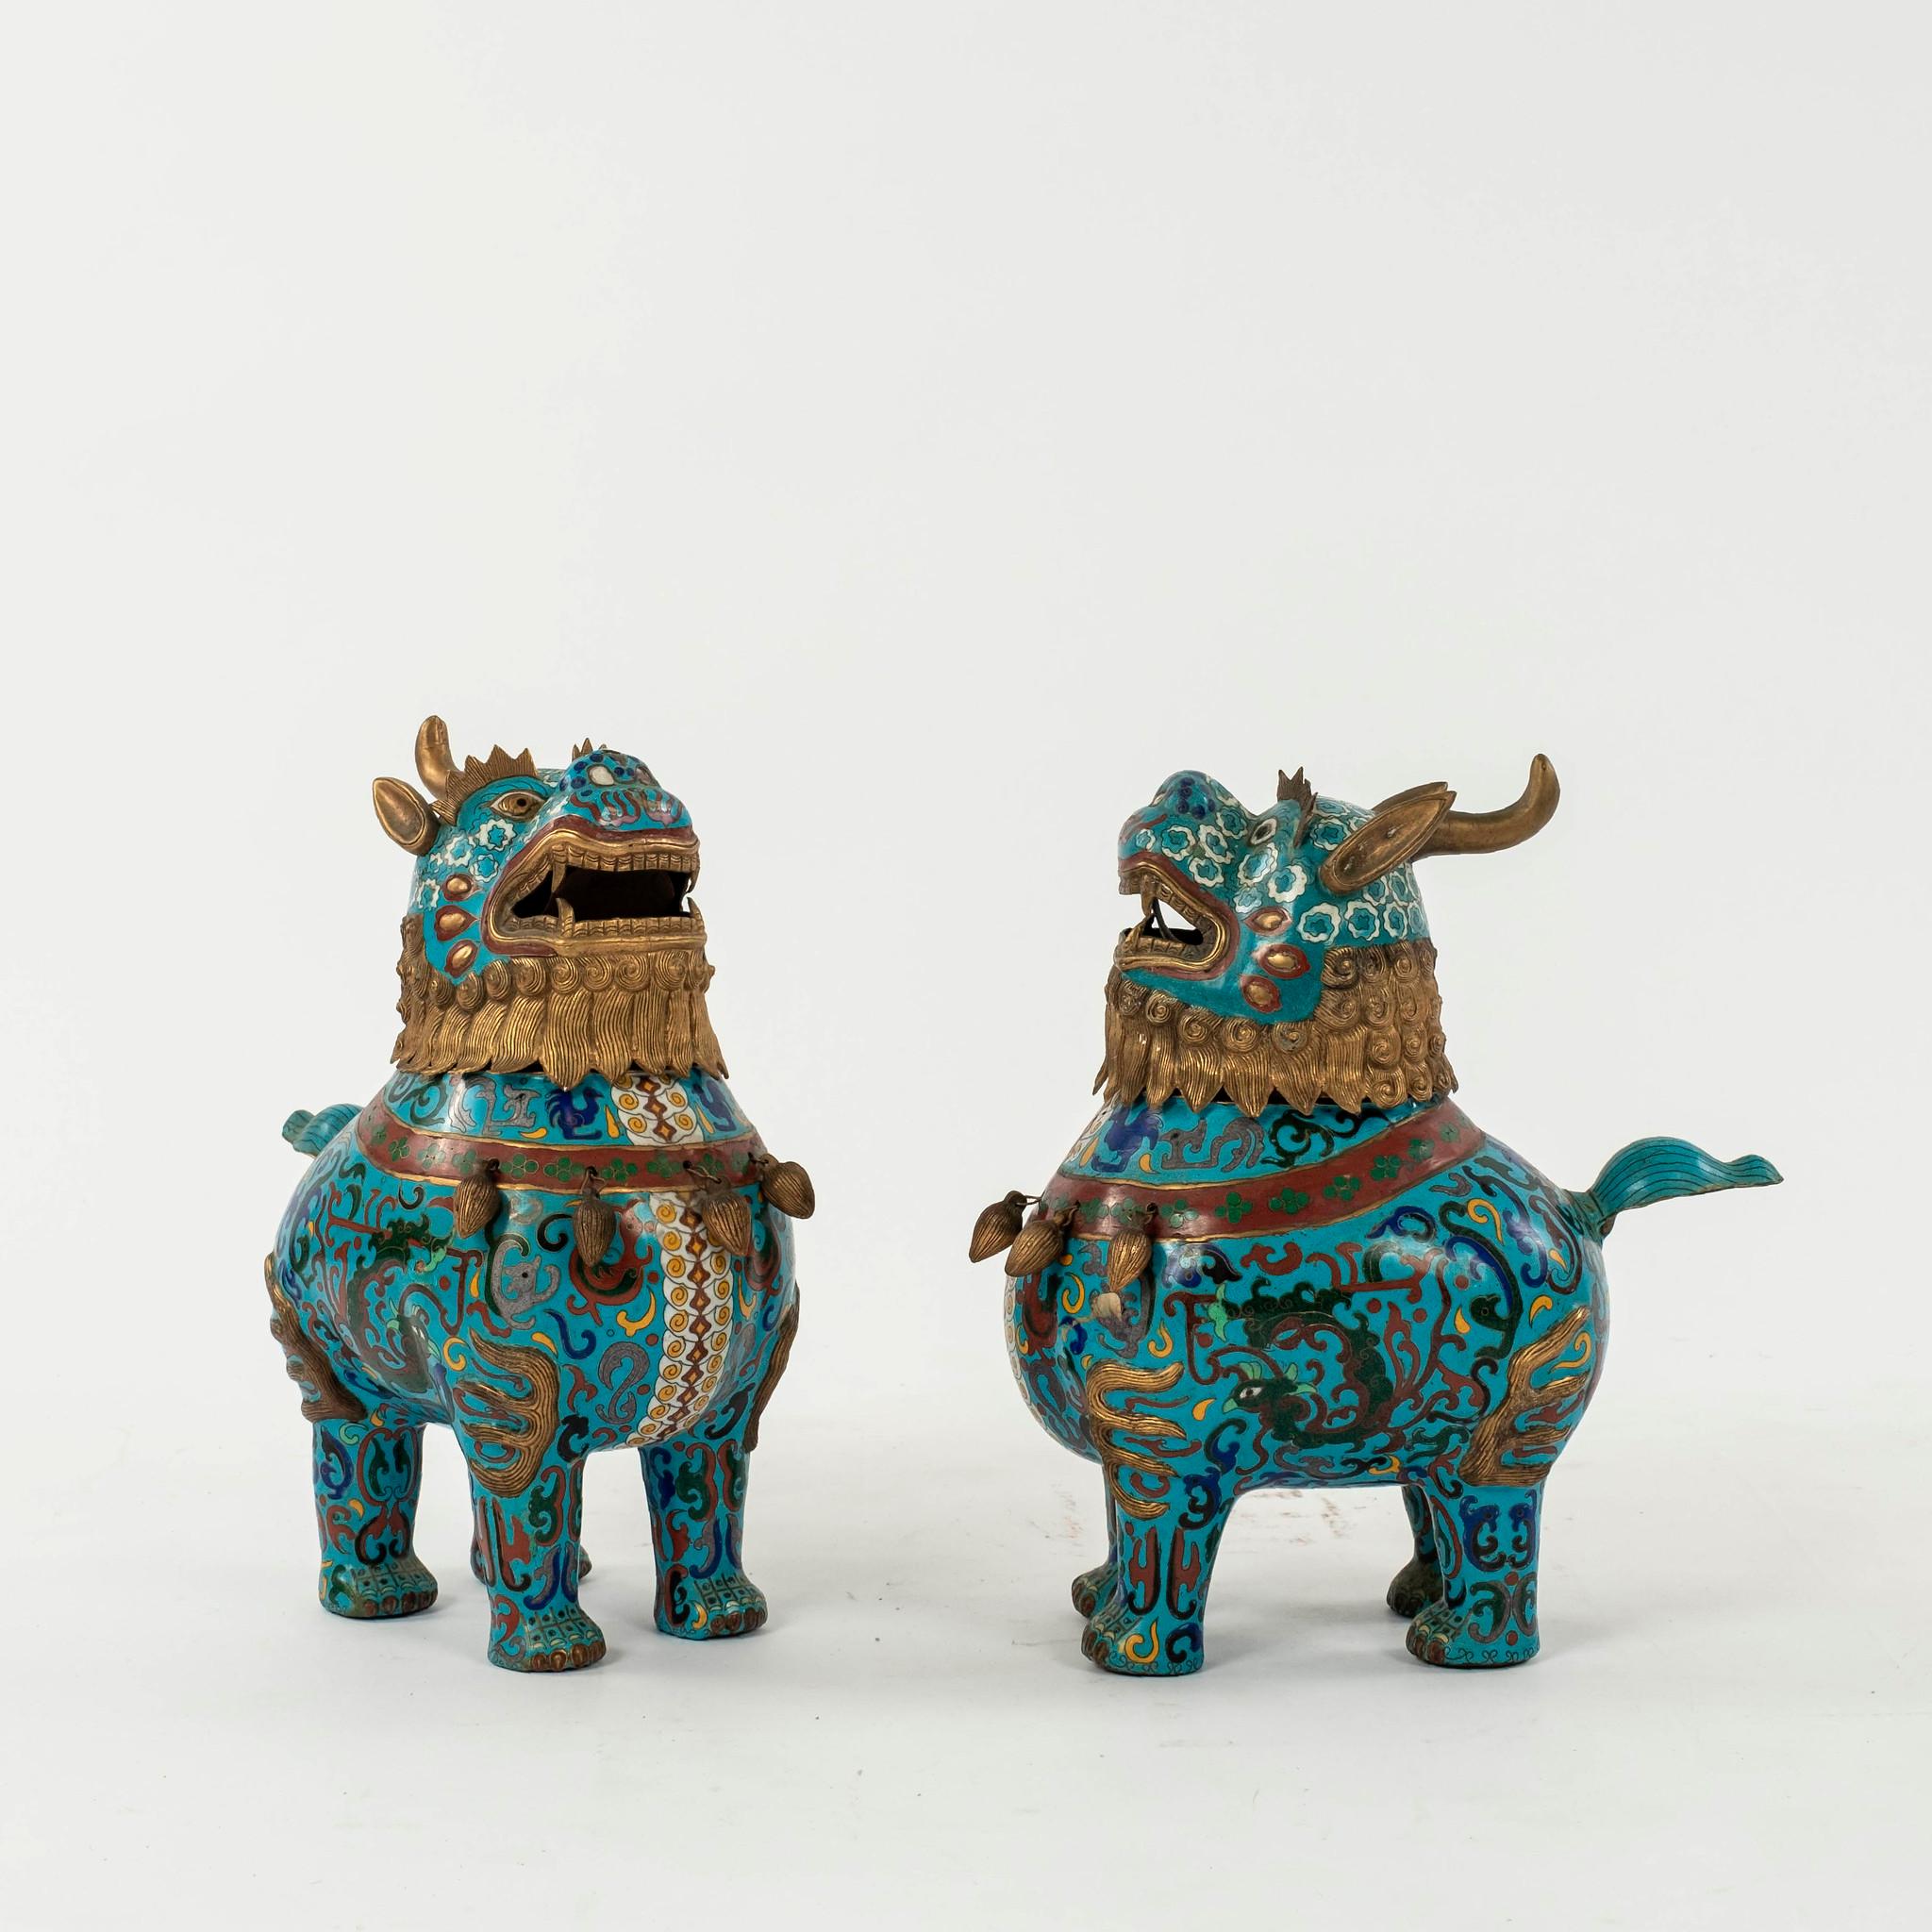 Copper base cloisonné Fu Dogs made for Chinese export with gilded, mane, ears and accents. This pair from 1910s or earlier.